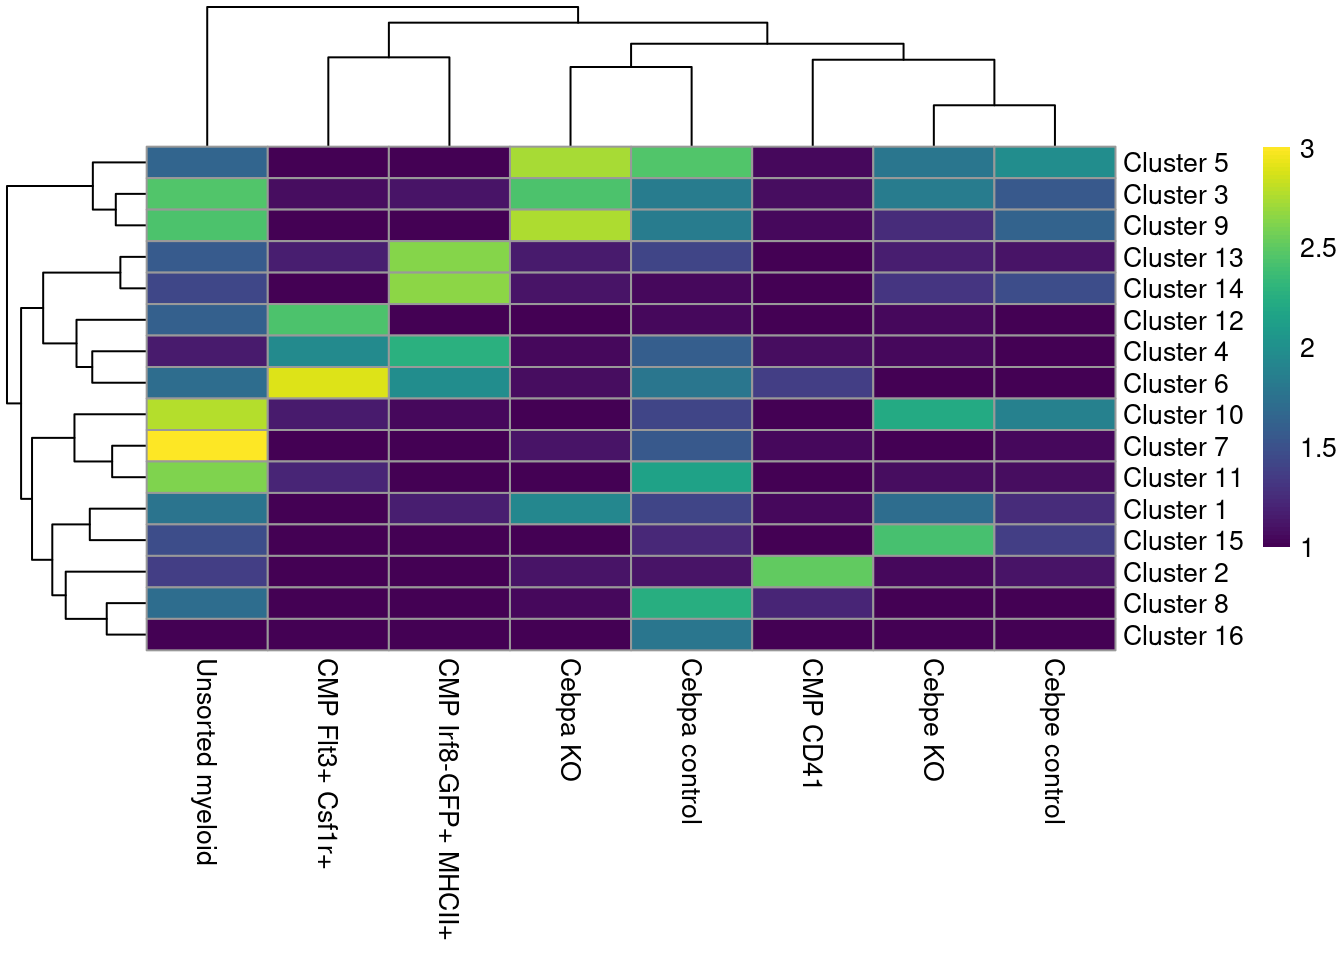 Heatmap of the distribution of cells across clusters (rows) for each experimental treatment (column).